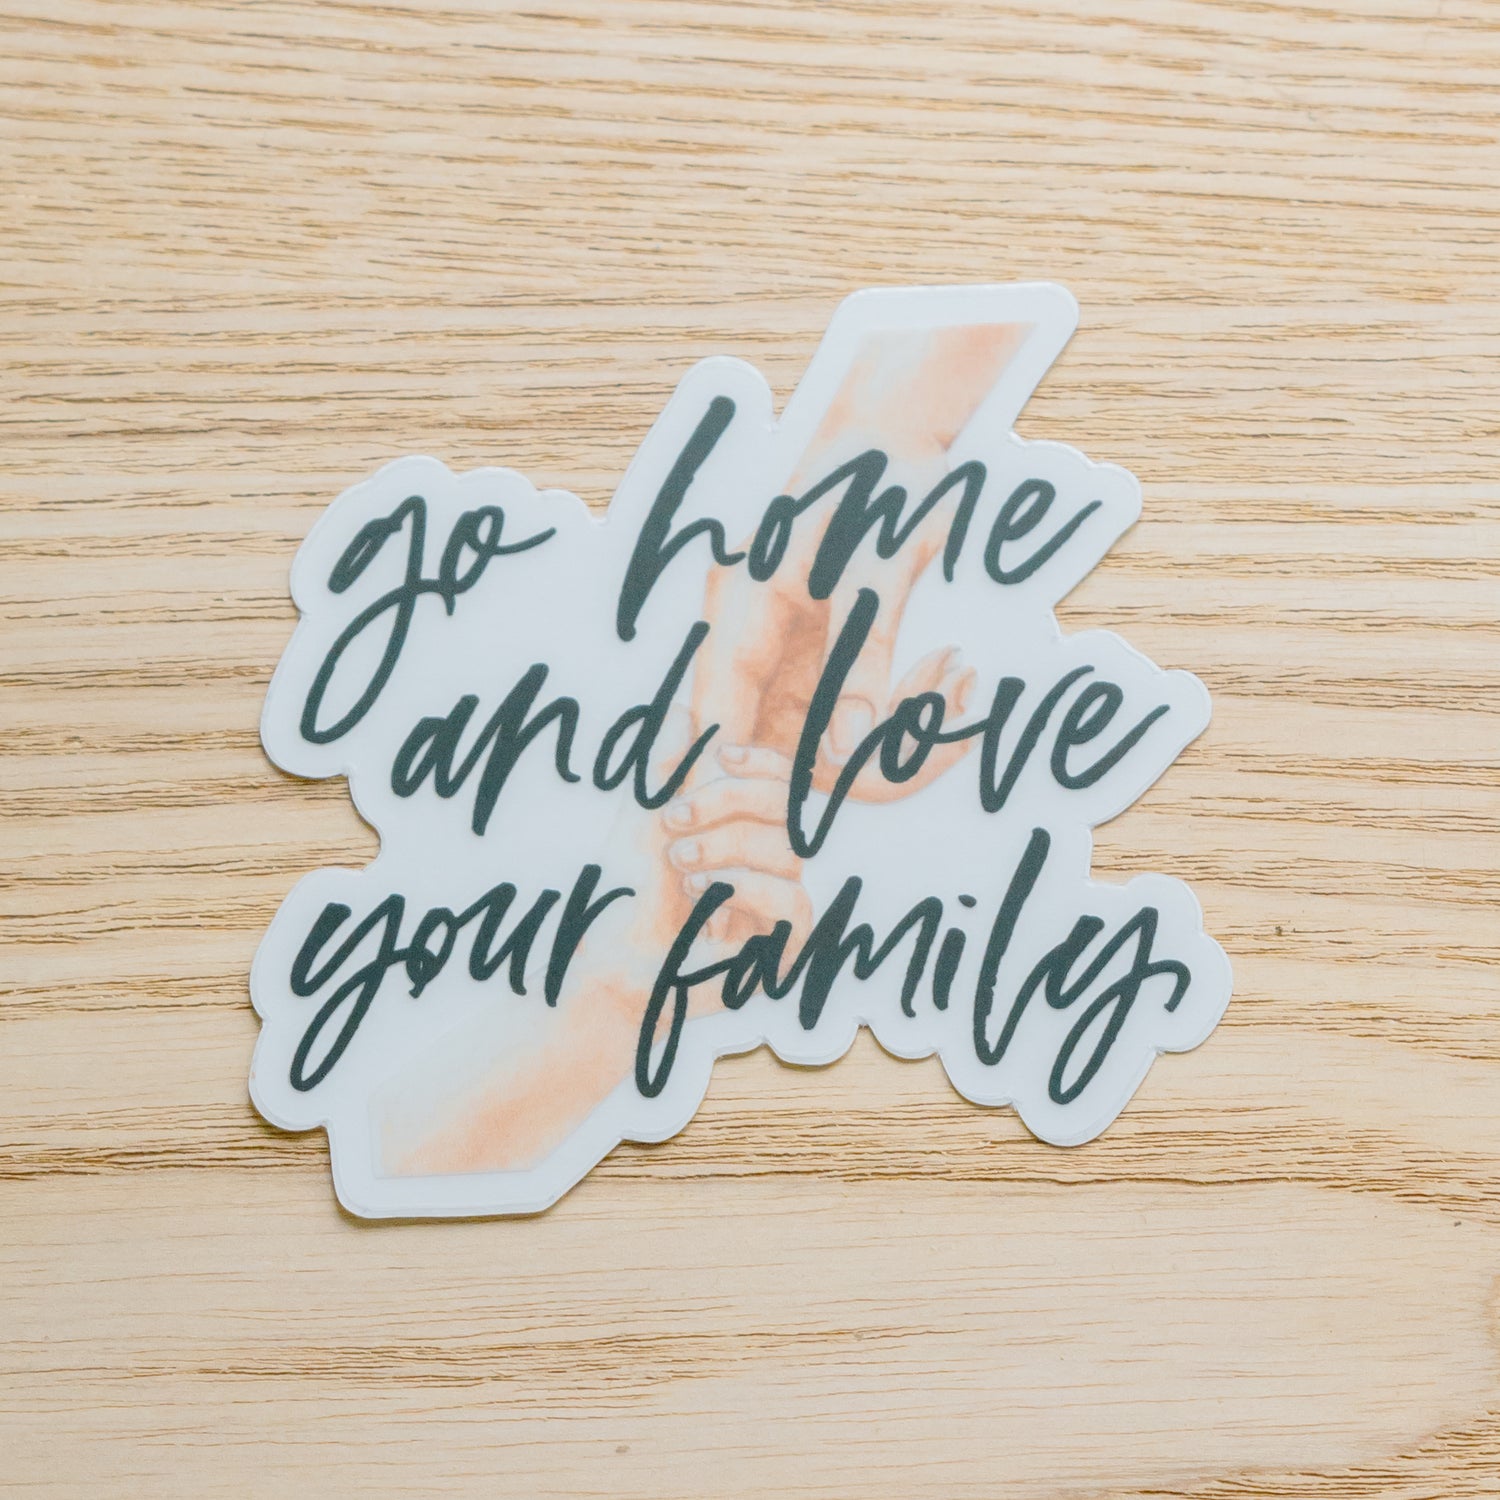 Go Home and Love Your Family Sticker